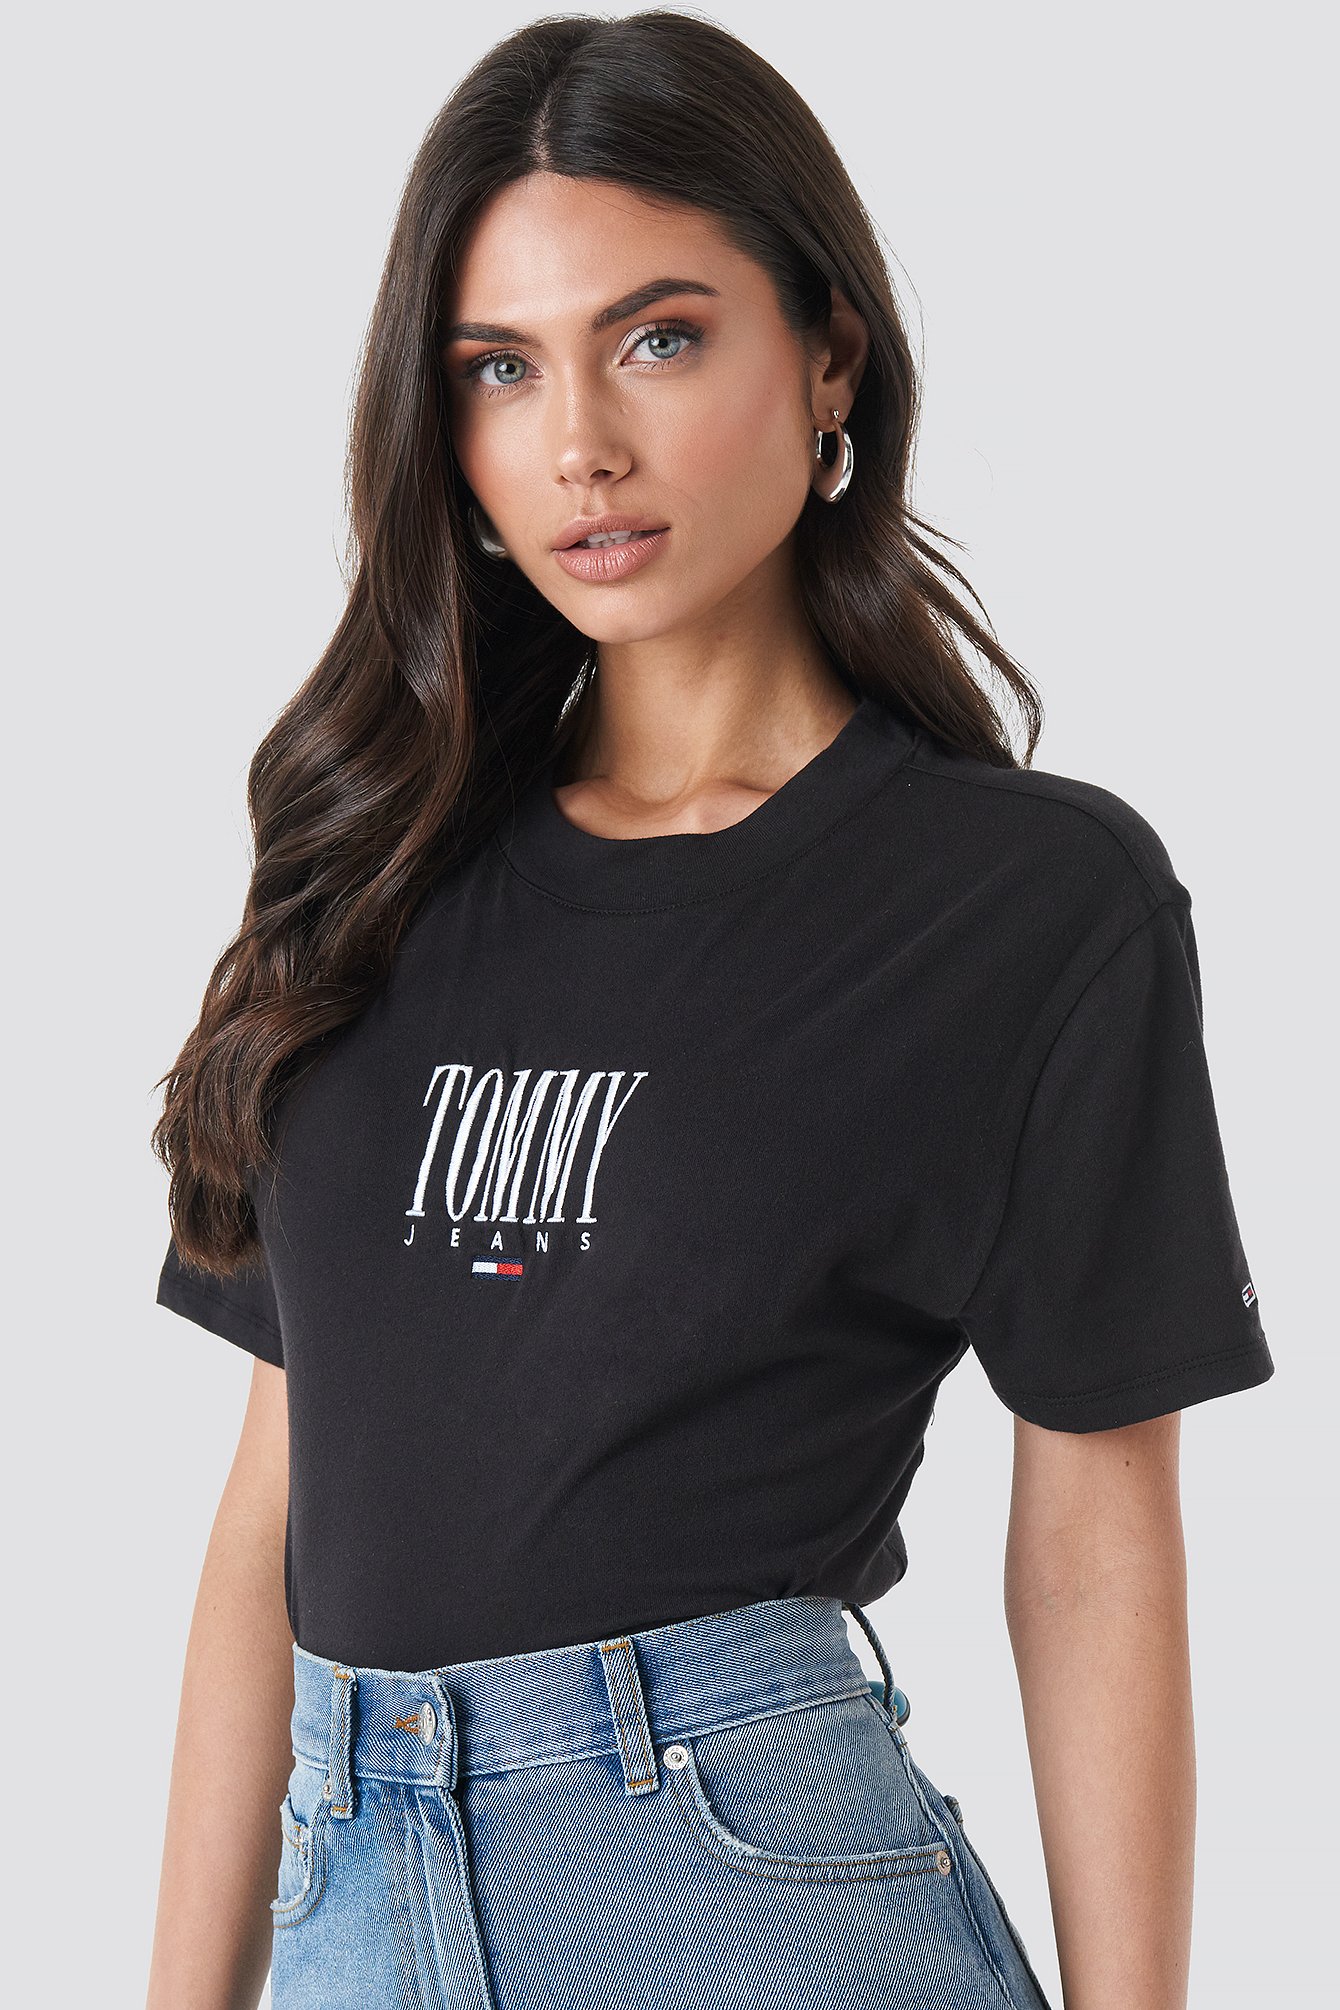 Tommy Jeans Emroidery Graphic Tee Black | na-kd.com